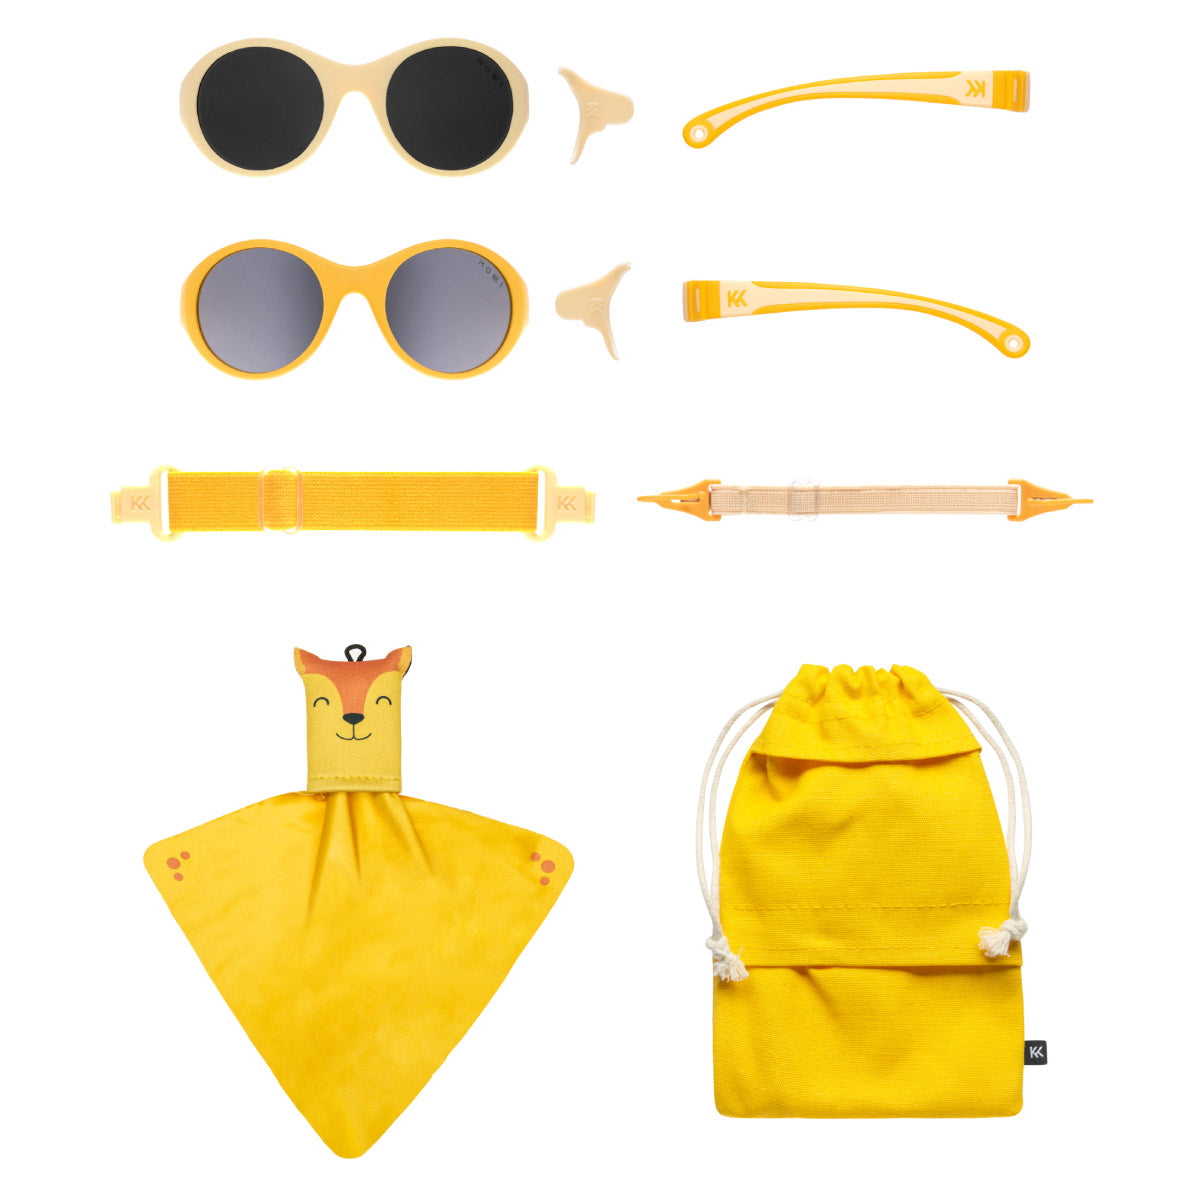 Click & Change sunglasses for kids in yellow